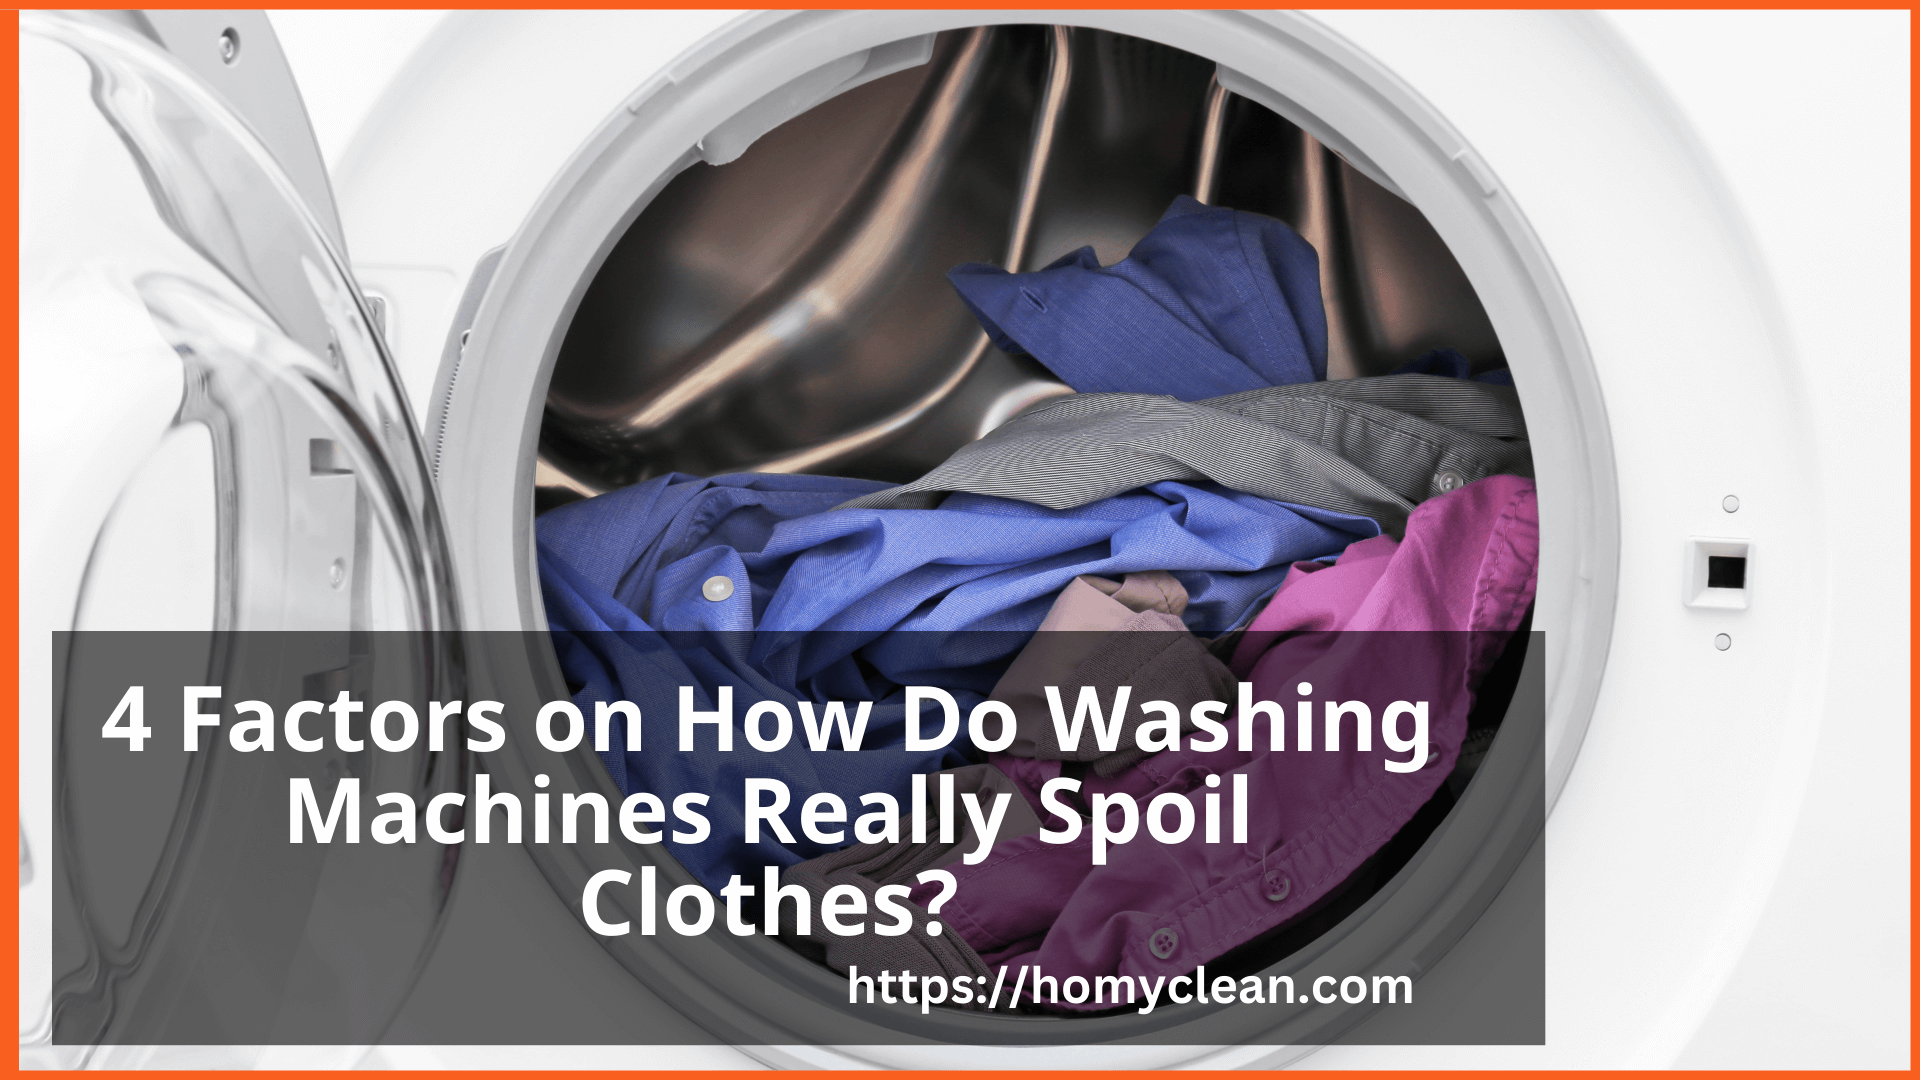 How to do Washing Machines Really Spoil Clothes